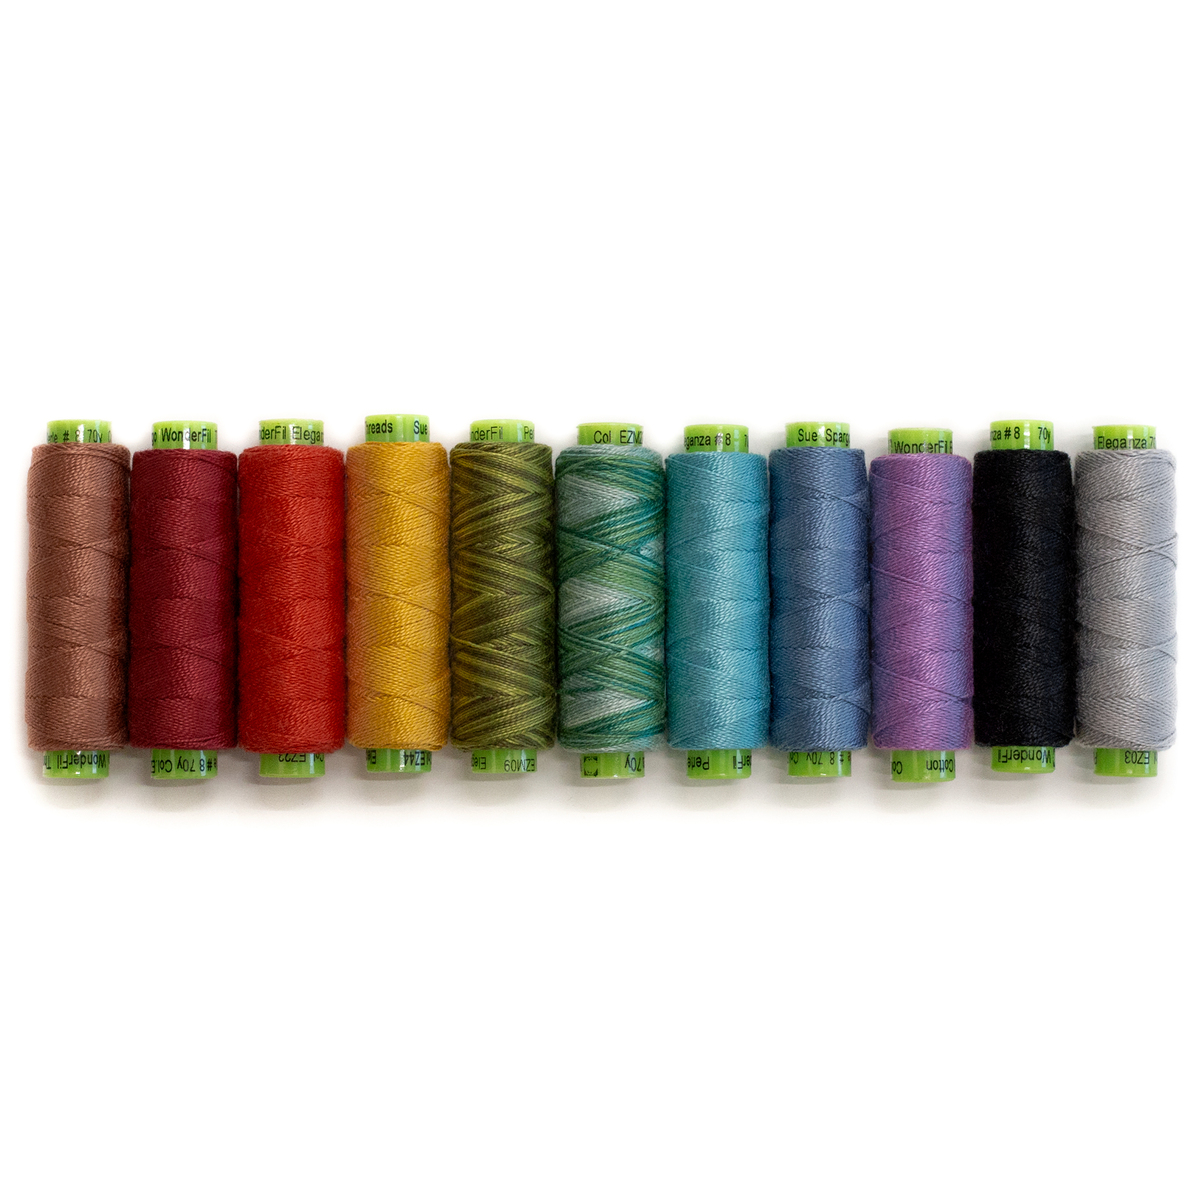 EMBROIDERY THREAD SET, STICKTWIST, Embroidery Thread, Thread for  Embroidery, Embroidery Set, Embroidery Thread Set, Thread Set, floral 